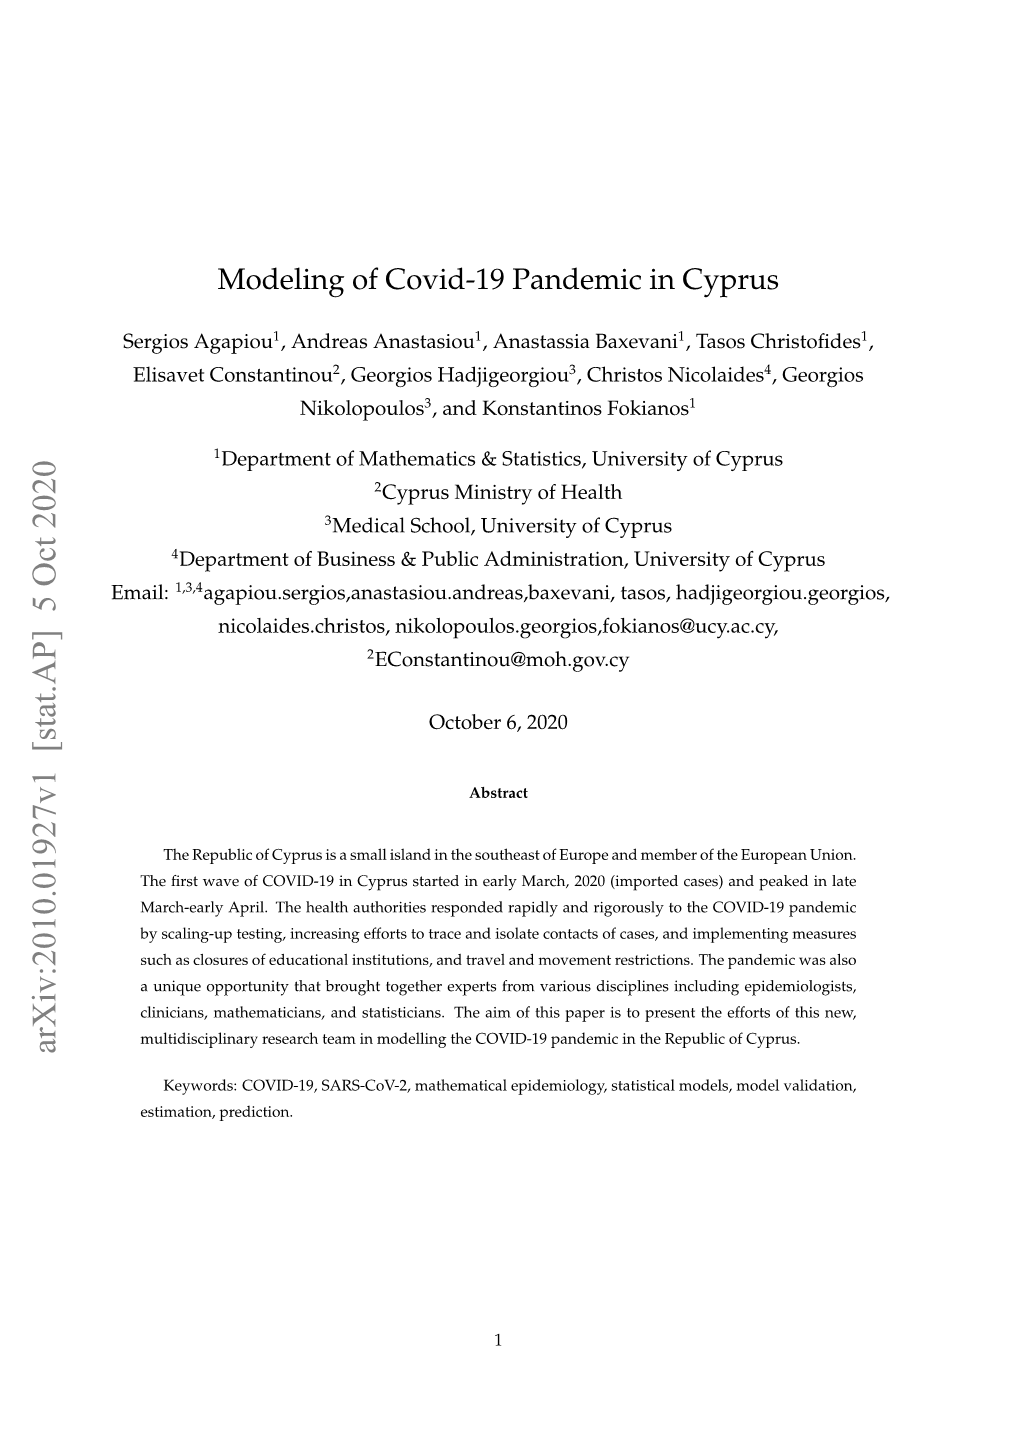 Modeling of Covid-19 Pandemic in Cyprus